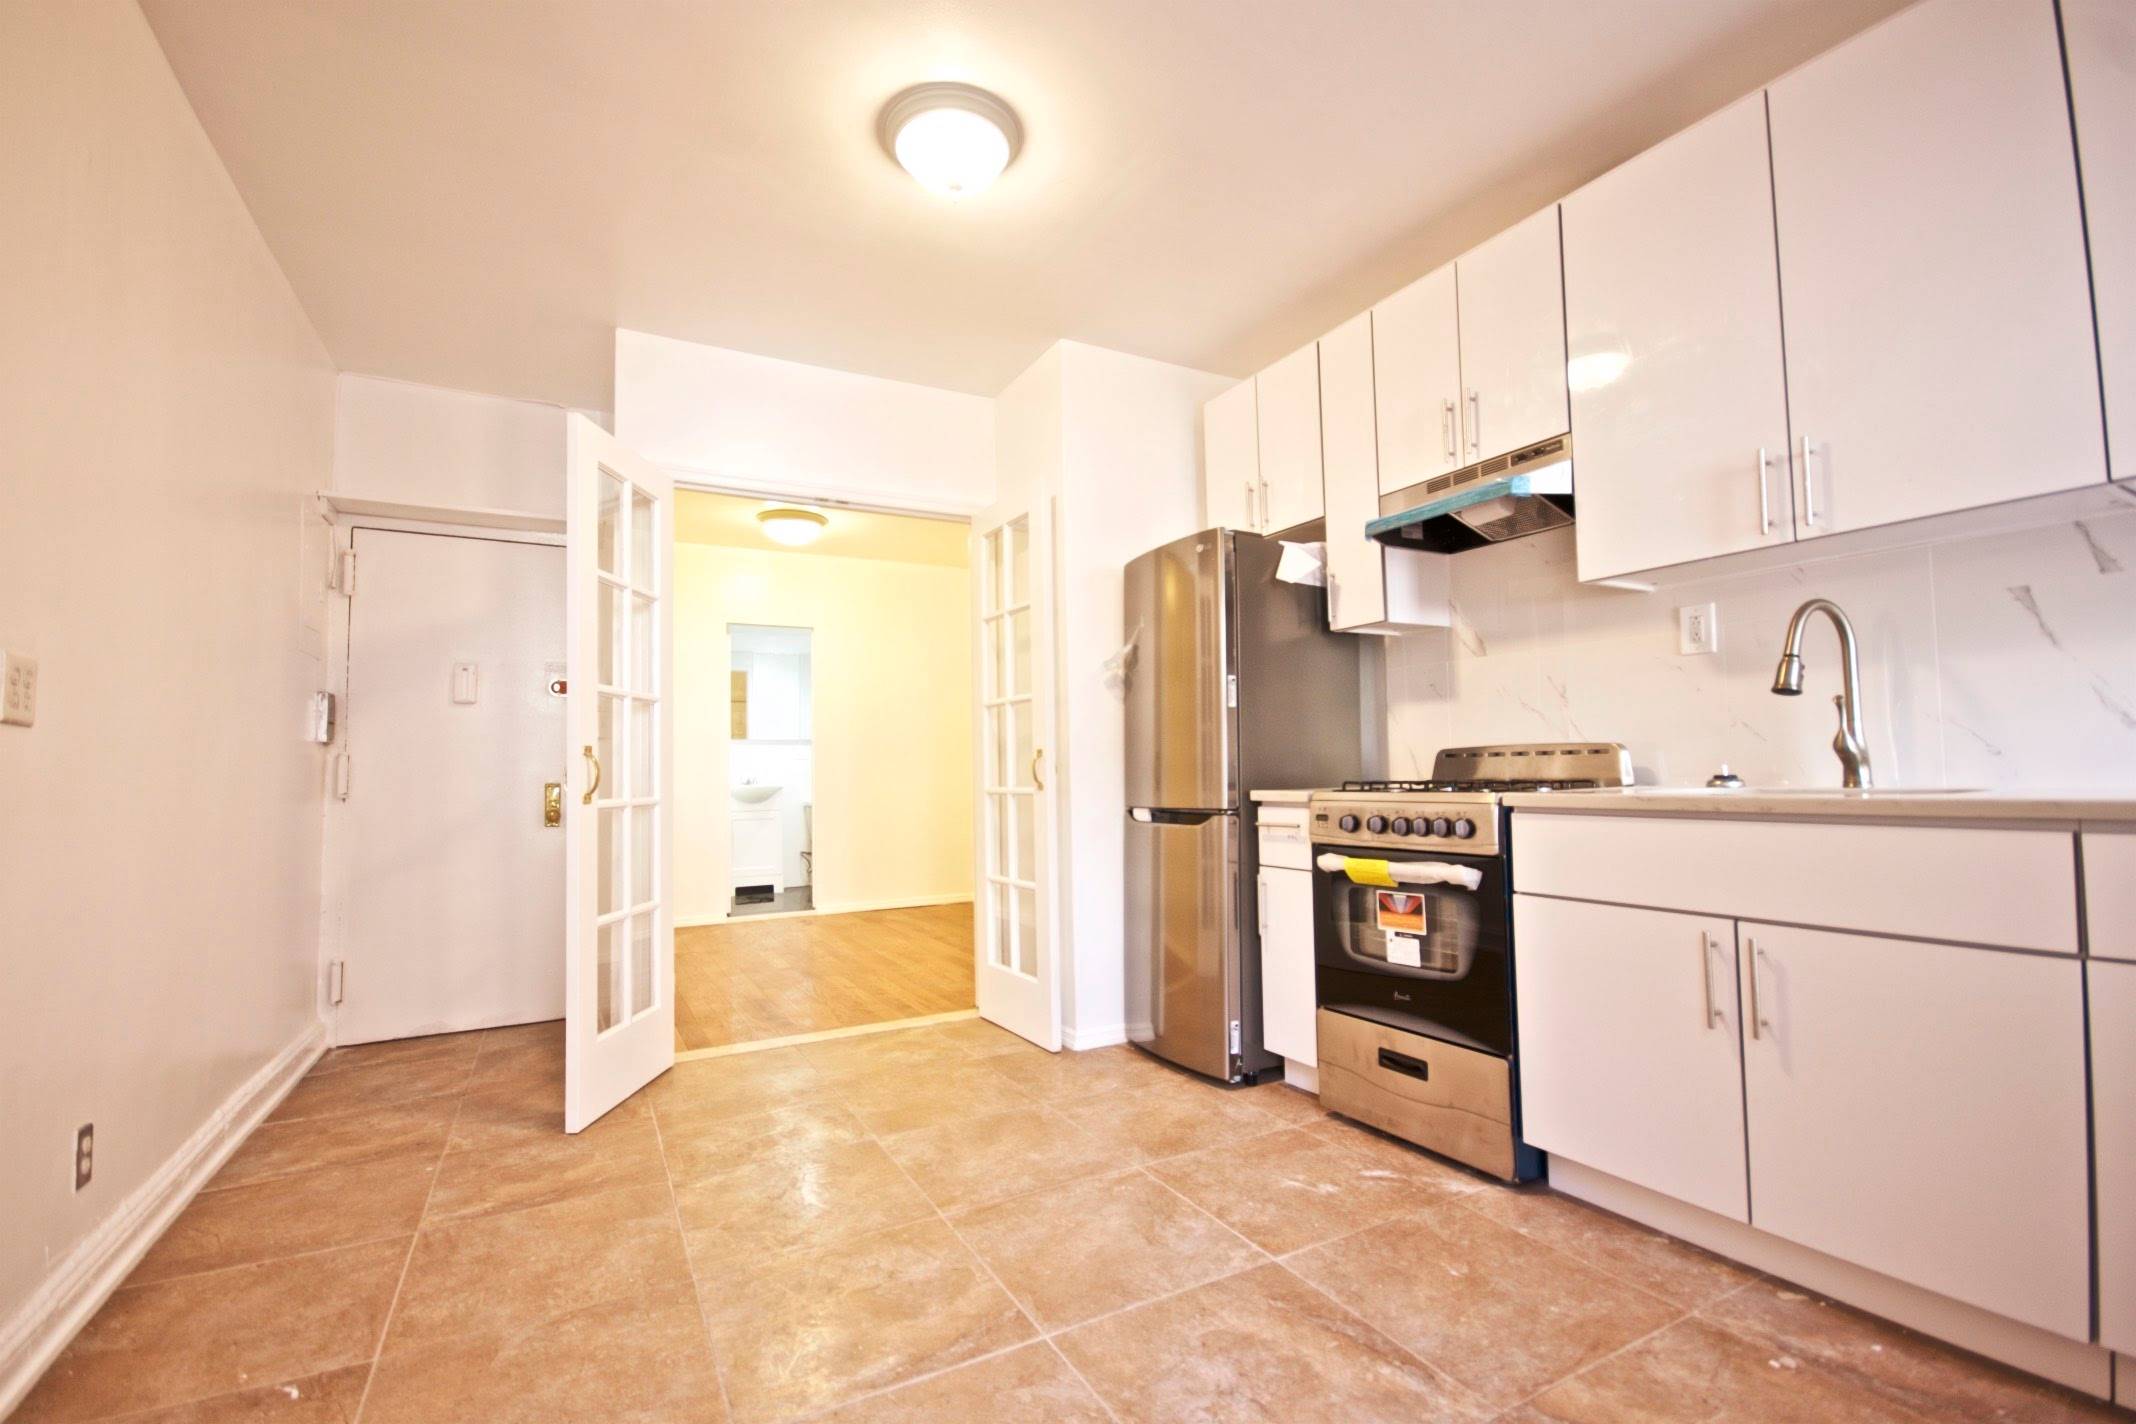 BRAND NEW RENT STABILIZED, TWO ROOM STUDIO IN THE HEART OF KIPS BAY!